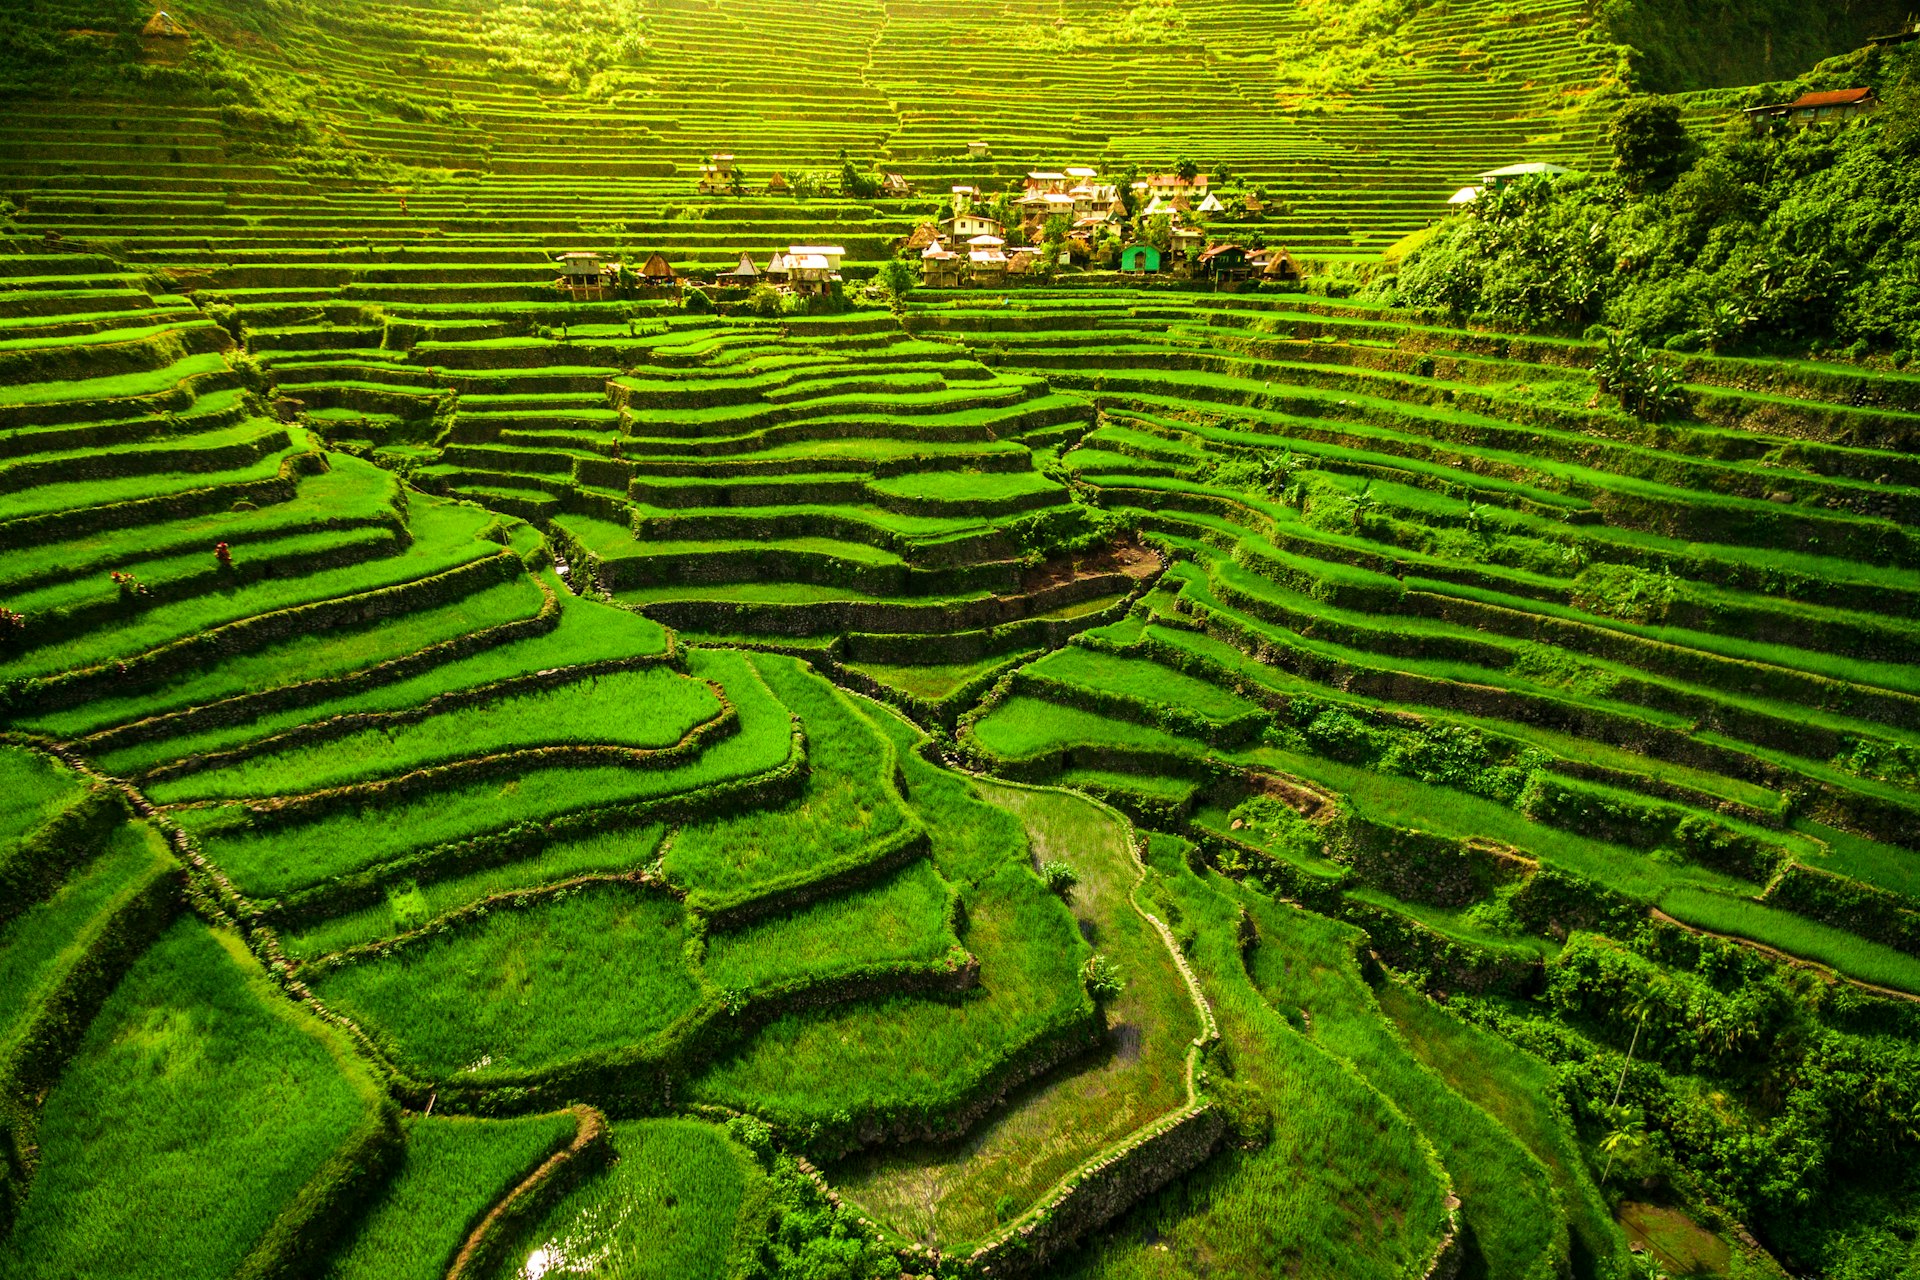 The 2000-year-old World Heritage Ifugao rice terraces in Batad, North Luzon, Philippines